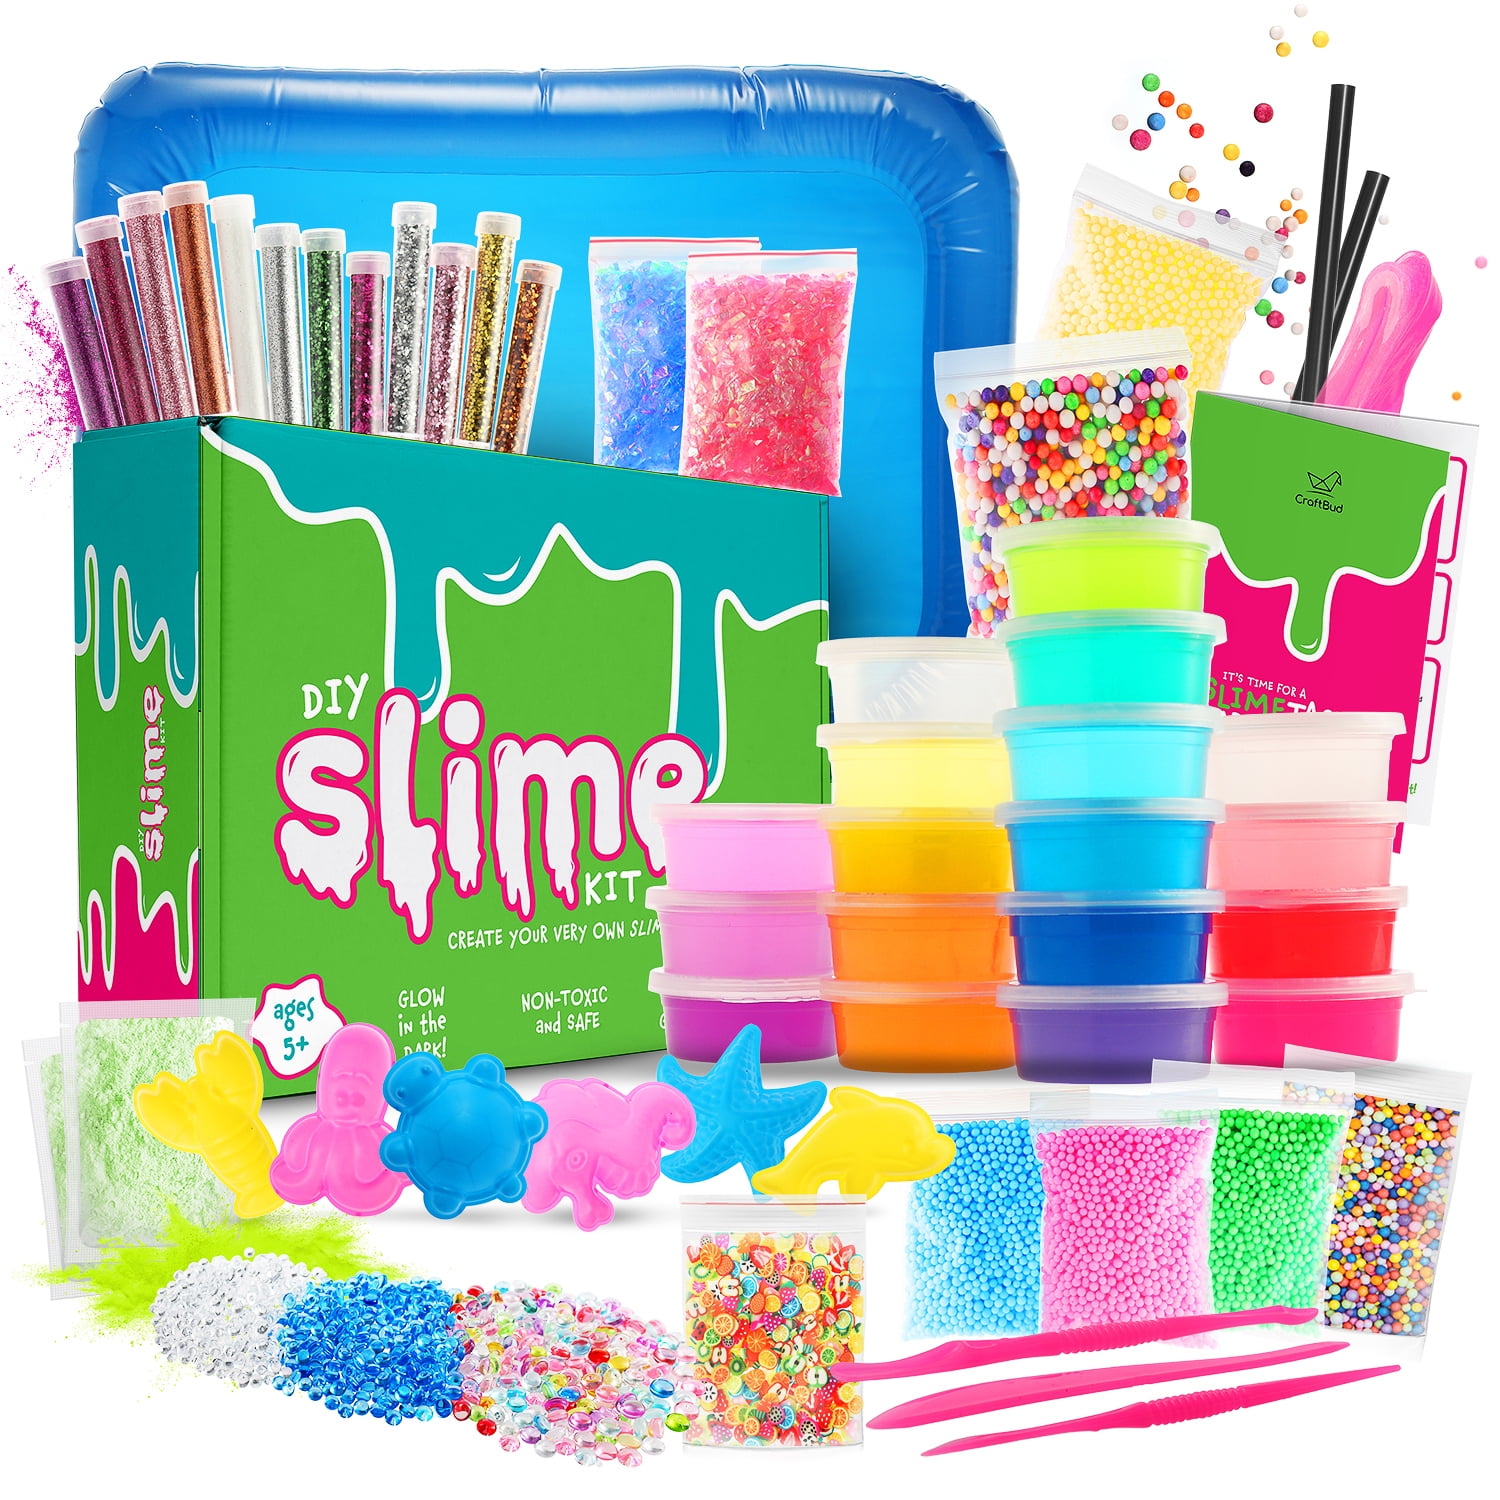 Laevo Unicorn Slime Kit for Girls - DIY Supplies Makes Butter Slime, Cloud  Slime, Clear Slime & More Sets - Toys for 5+ Years Old